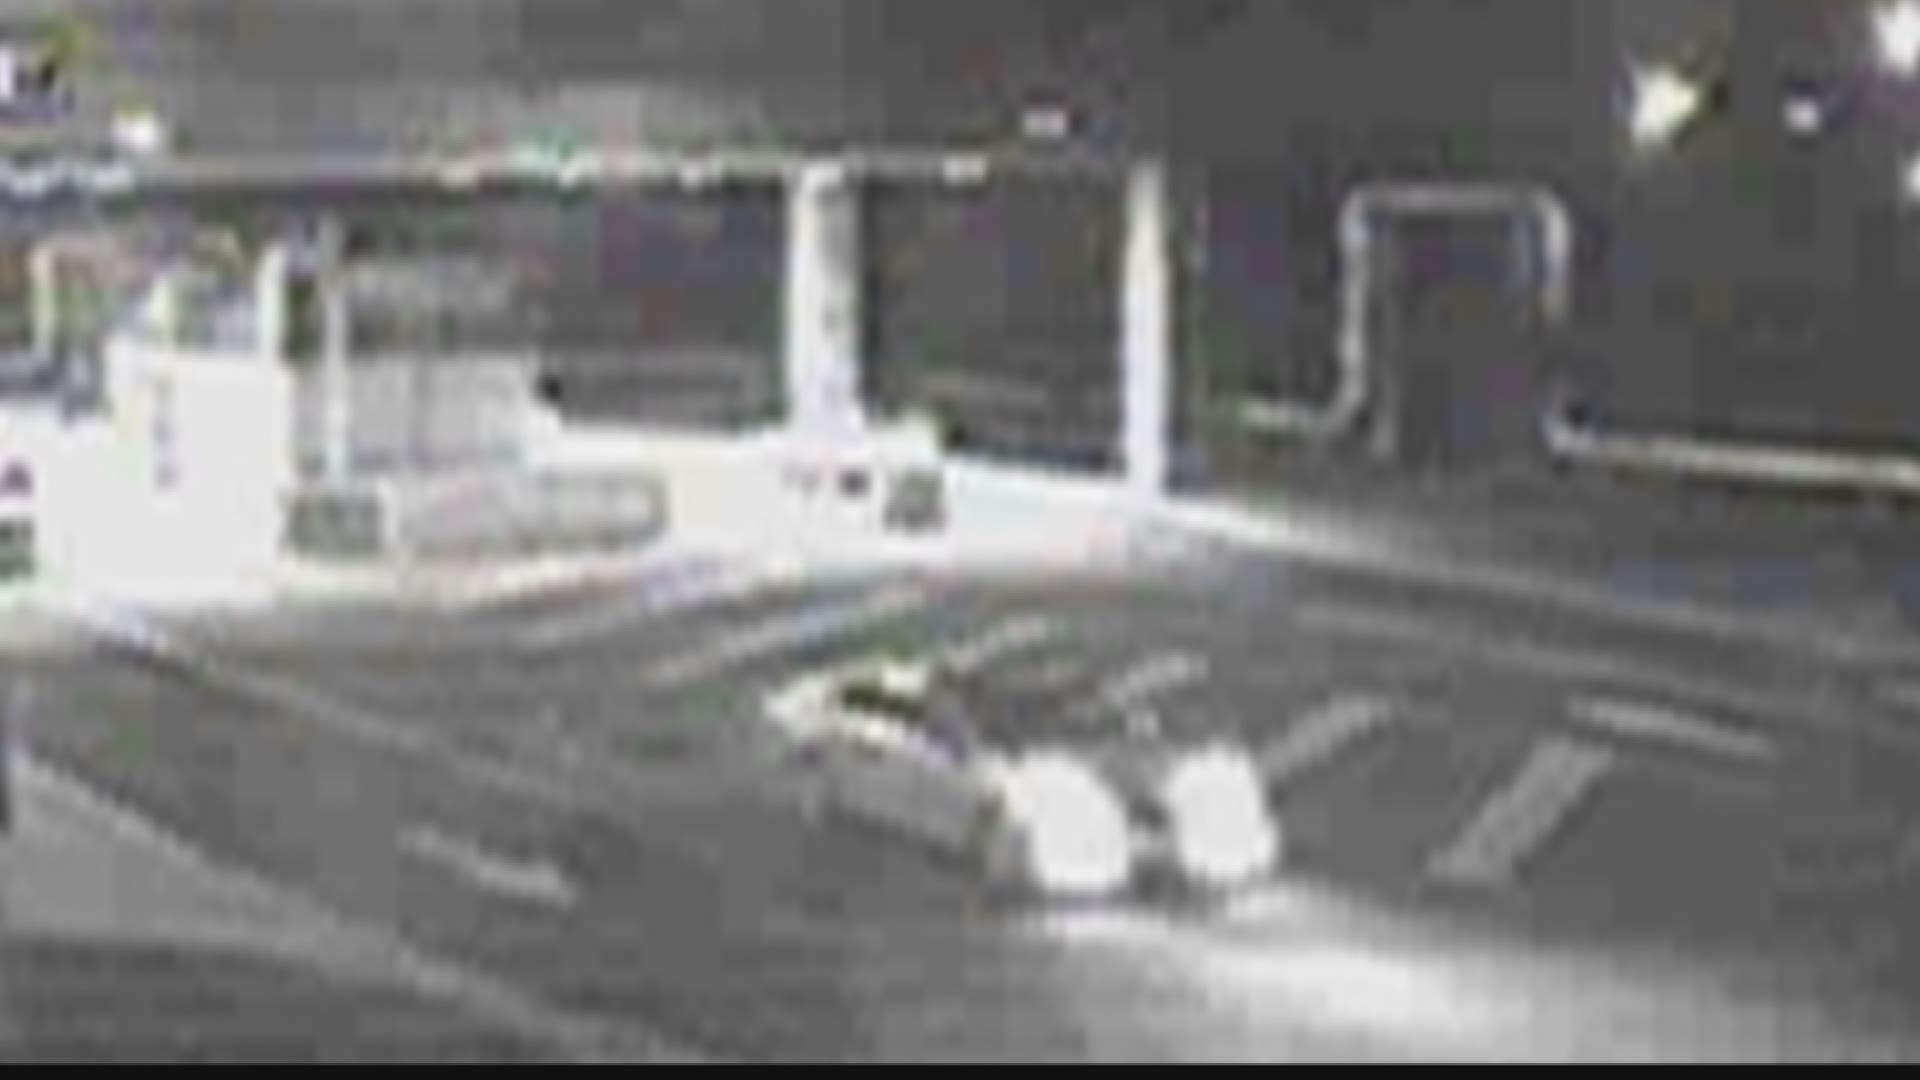 The FBI released video of Ashanti Billie's car entering JEB Little Creek-Fort Story, where it was last seen before her disappearance.